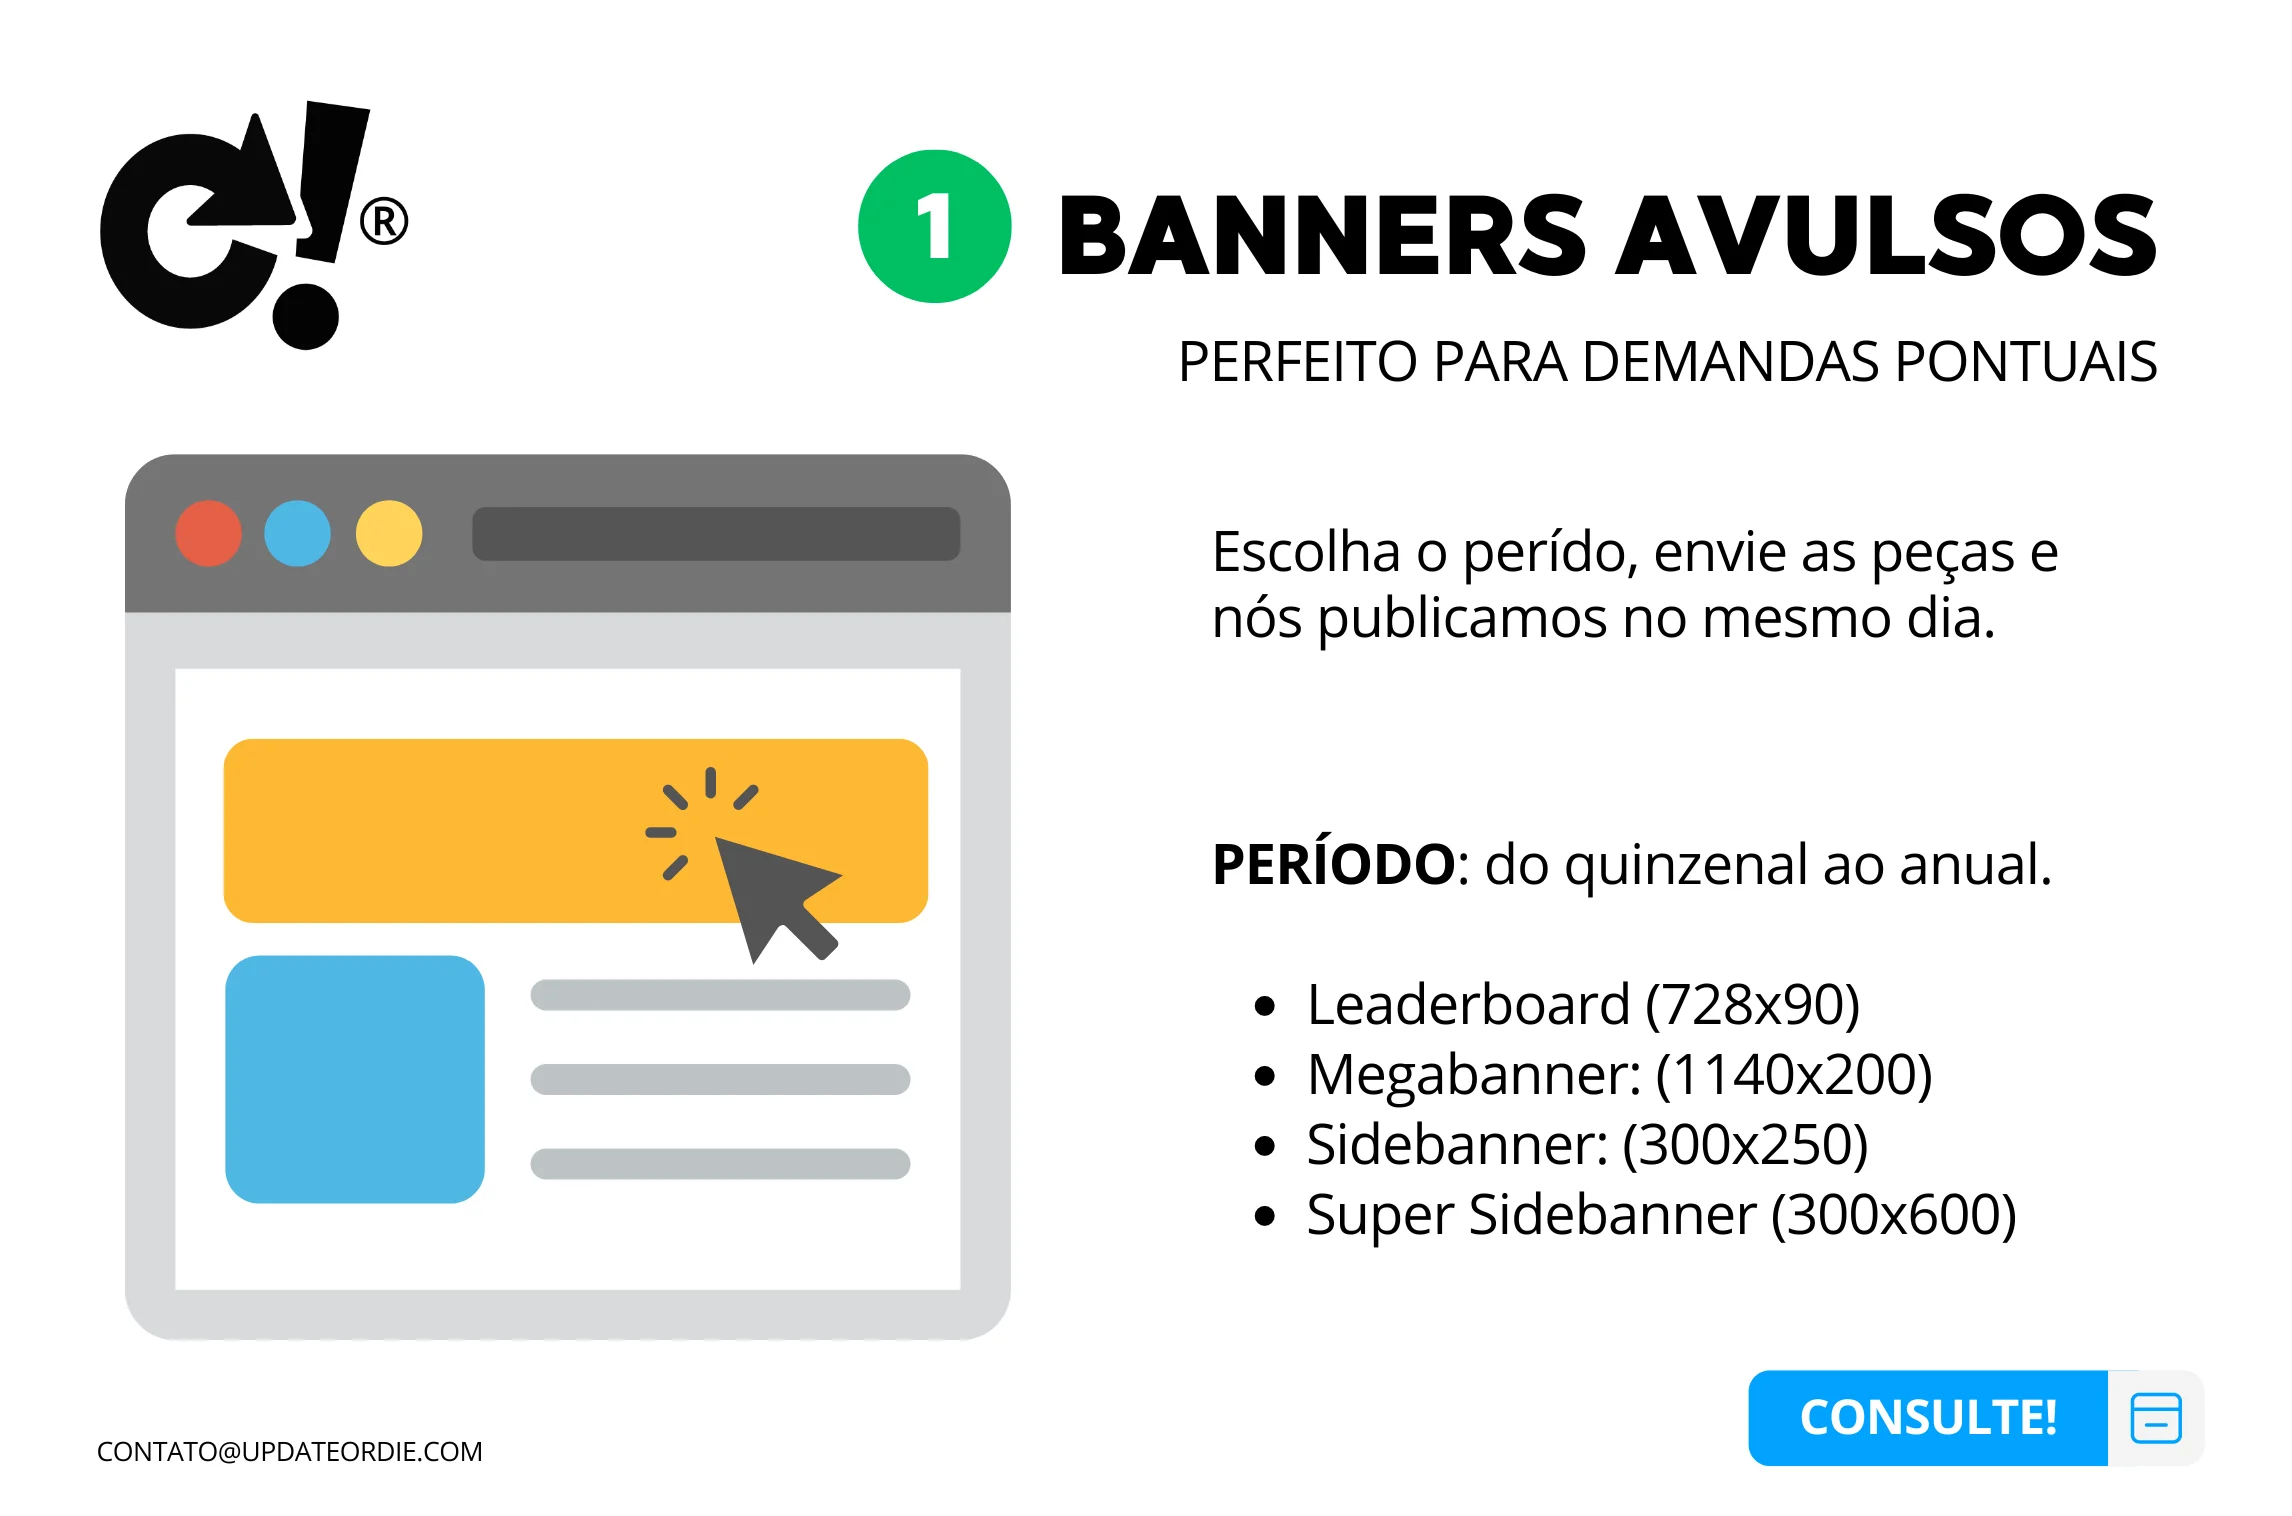 Illustration of various web banner advertisement formats with a focus on 'Banners Avulsos' suitable for short-term marketing needs.